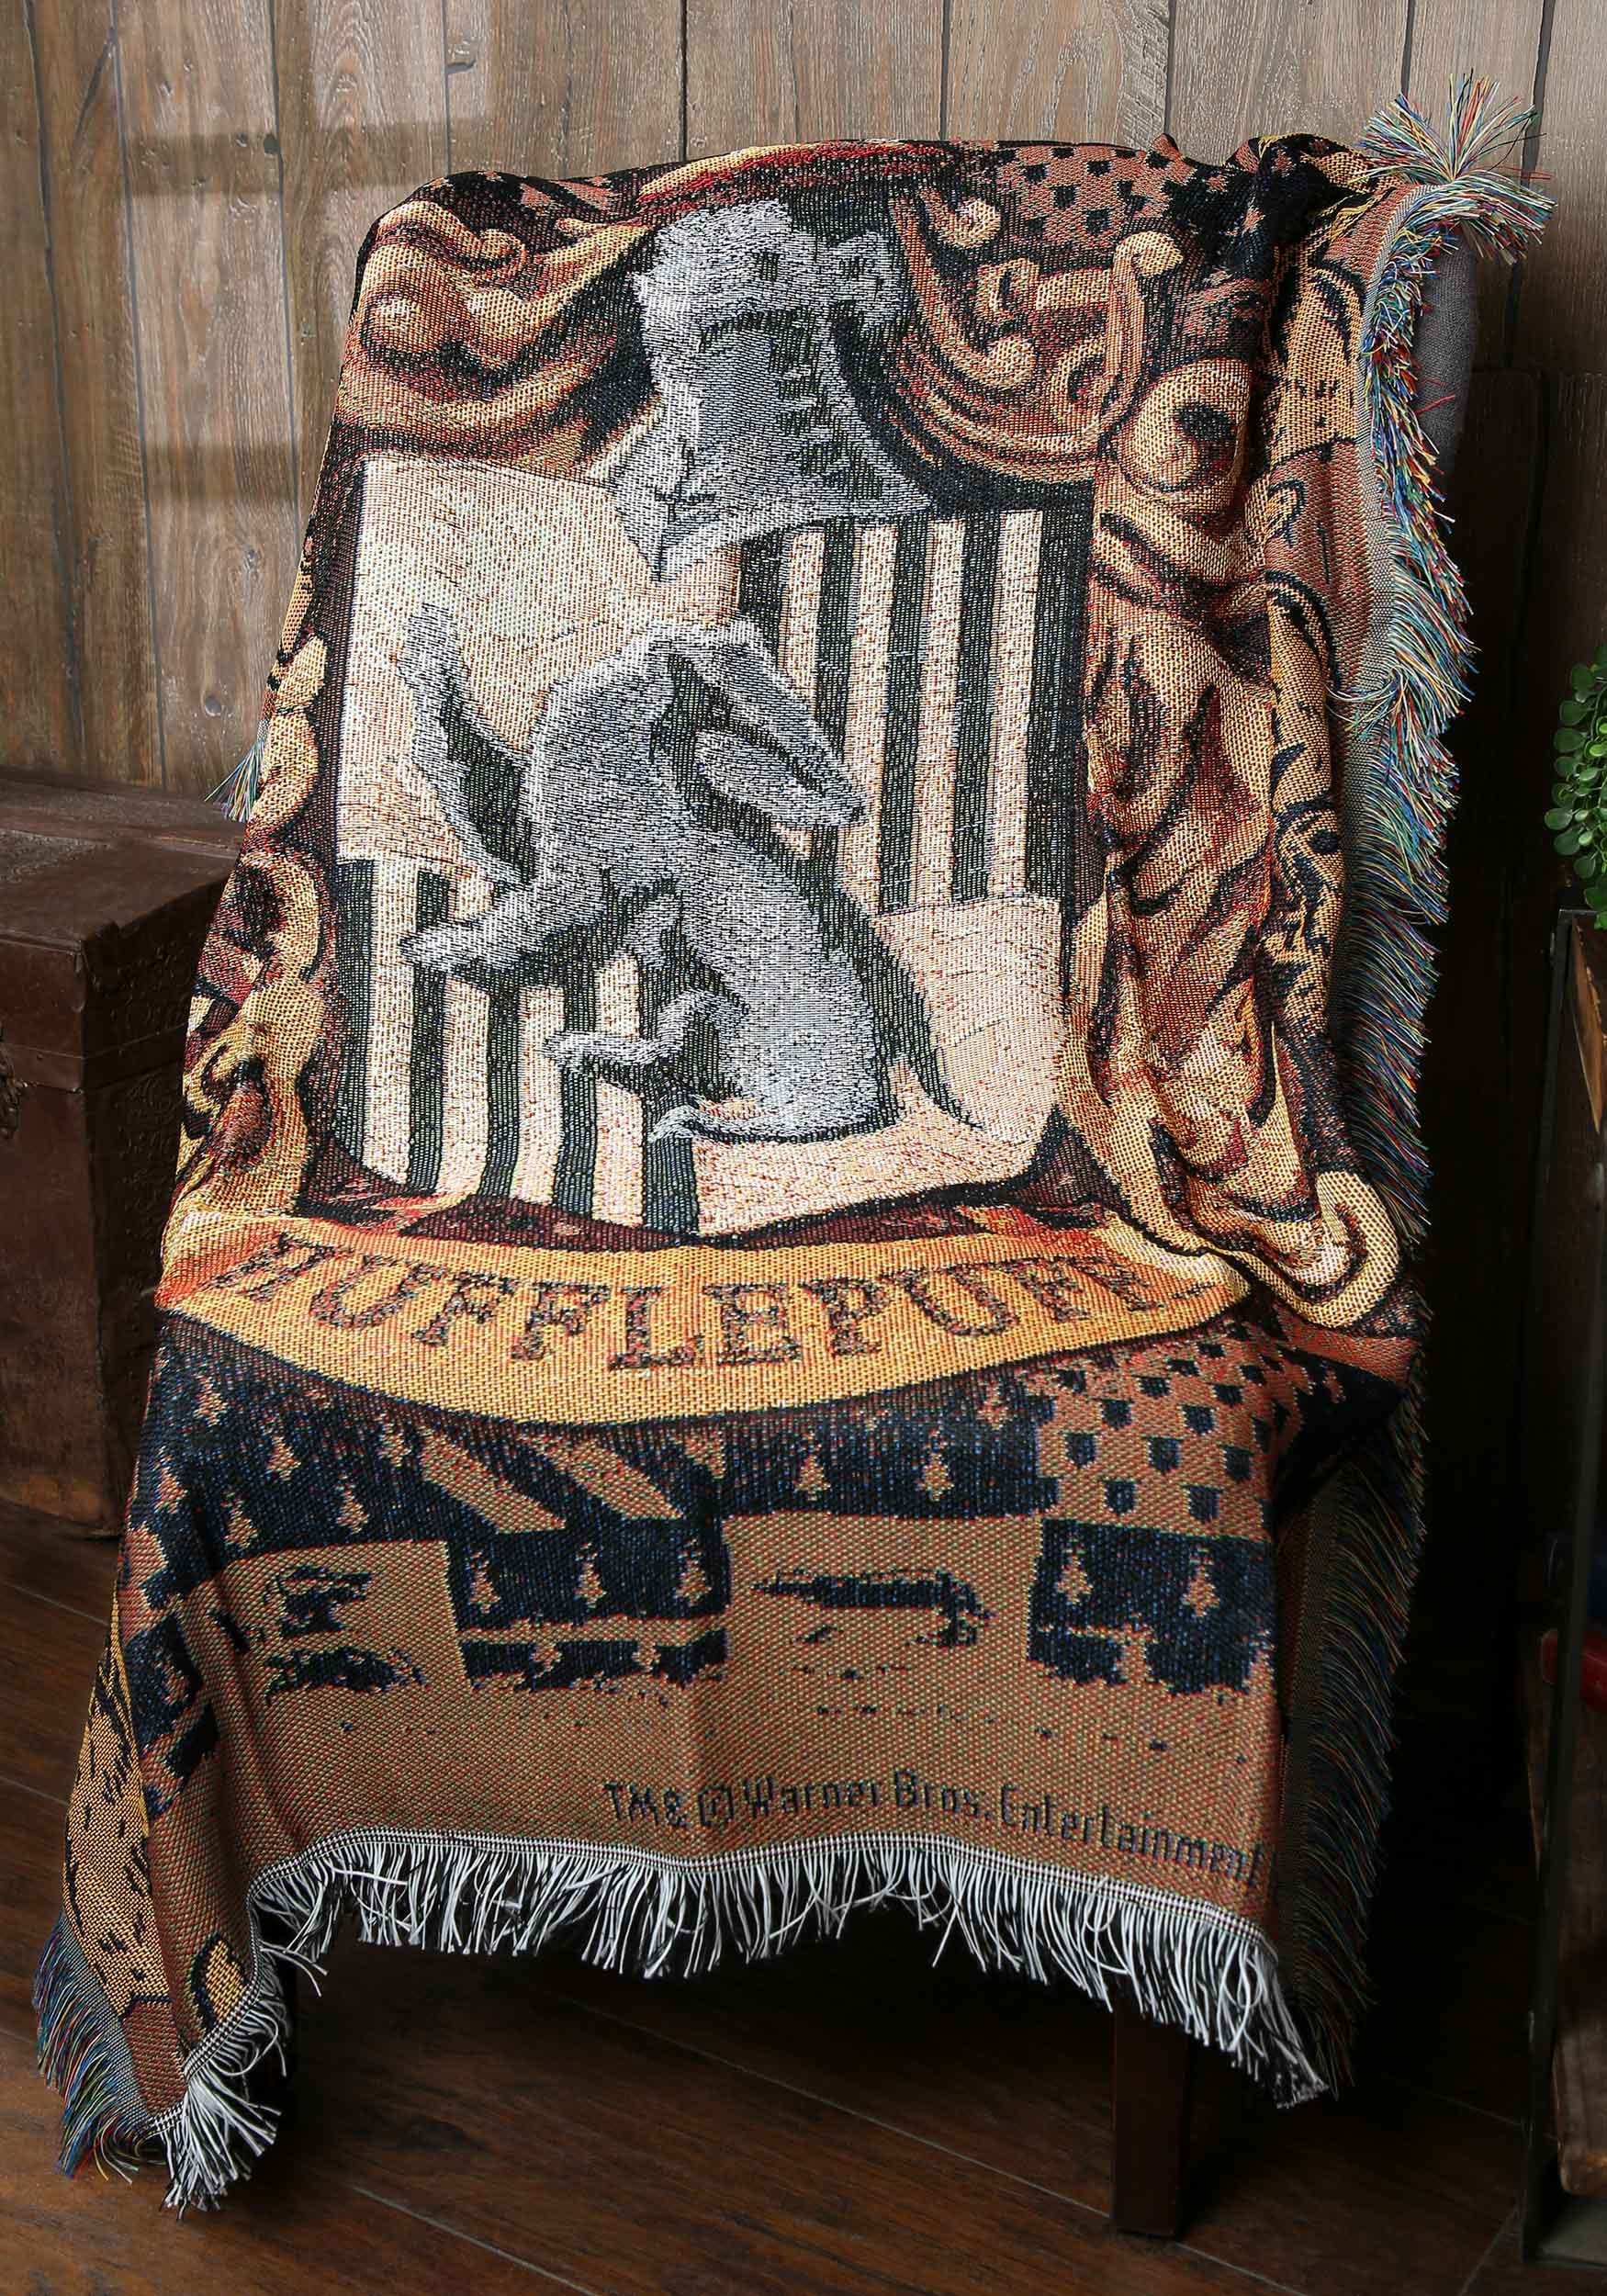 https://images.fun.com/products/62206/1-1/harry-potter-hufflepuff-shield-woven-tapestry-throw-blanket.jpg